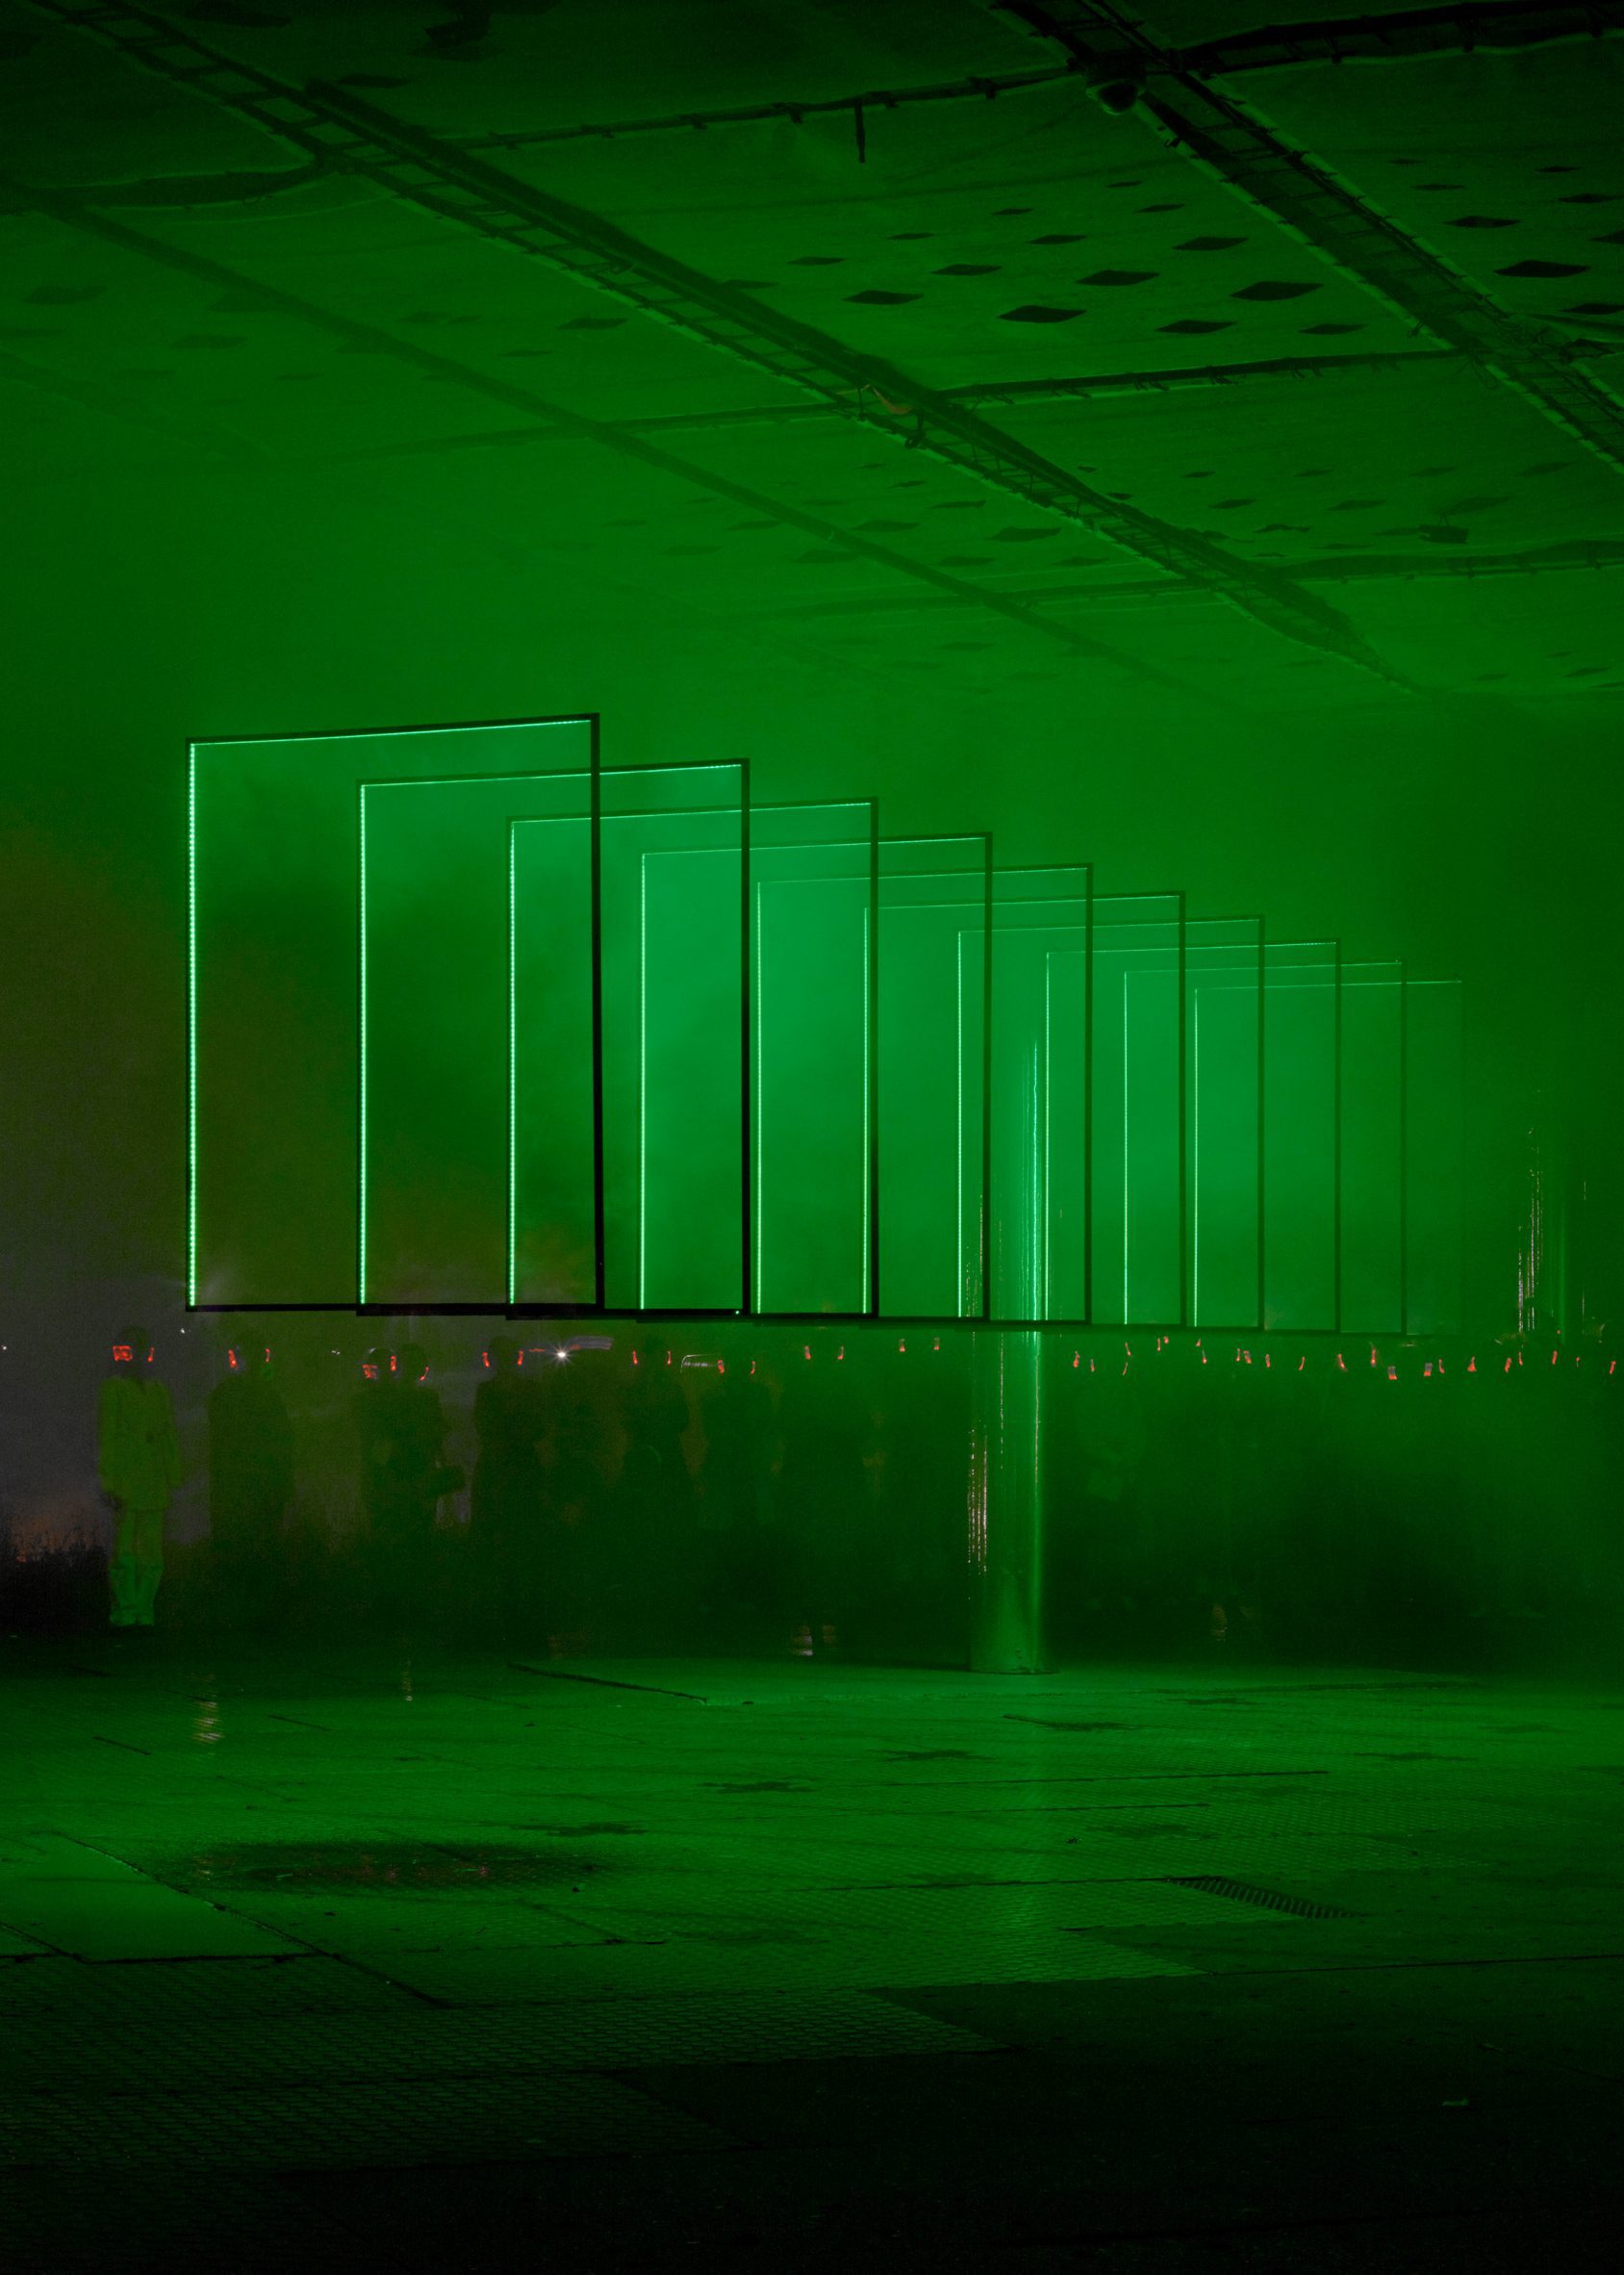 Neon green lighting was used throughout